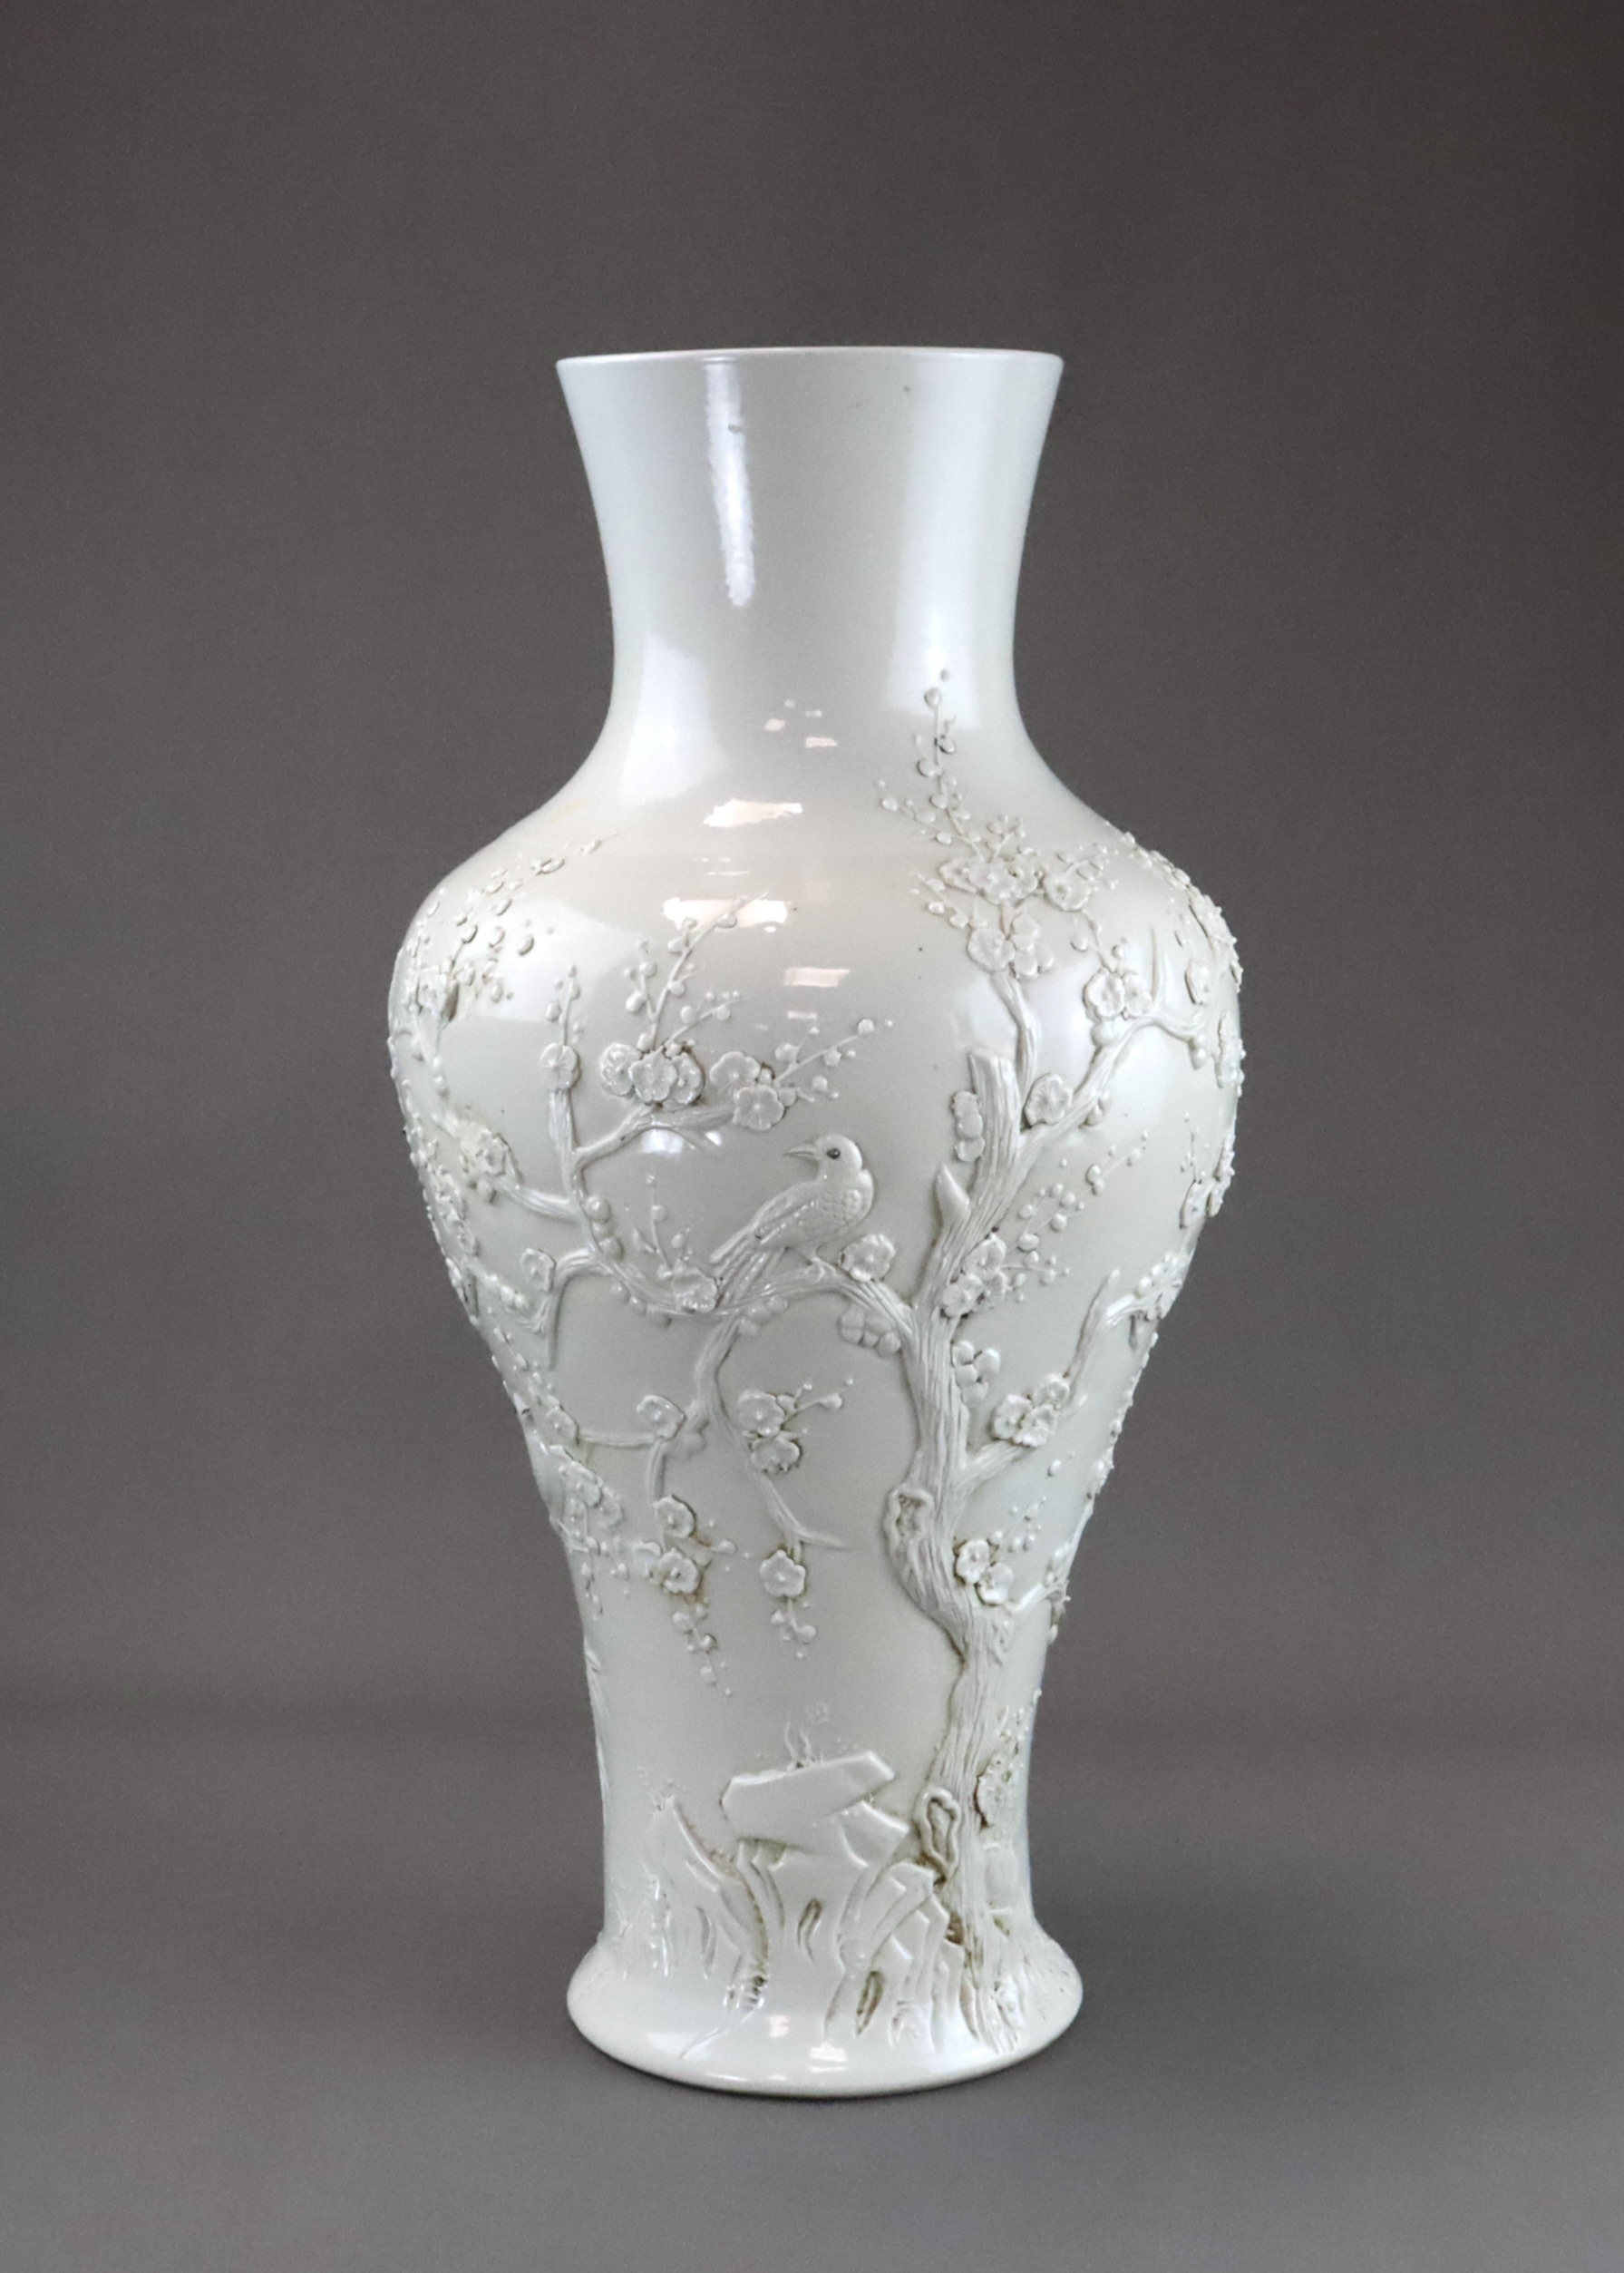 A Large White glazed Wang Bingrong type Bird and Flower Vase, late Qing dynasty, - Image 5 of 8